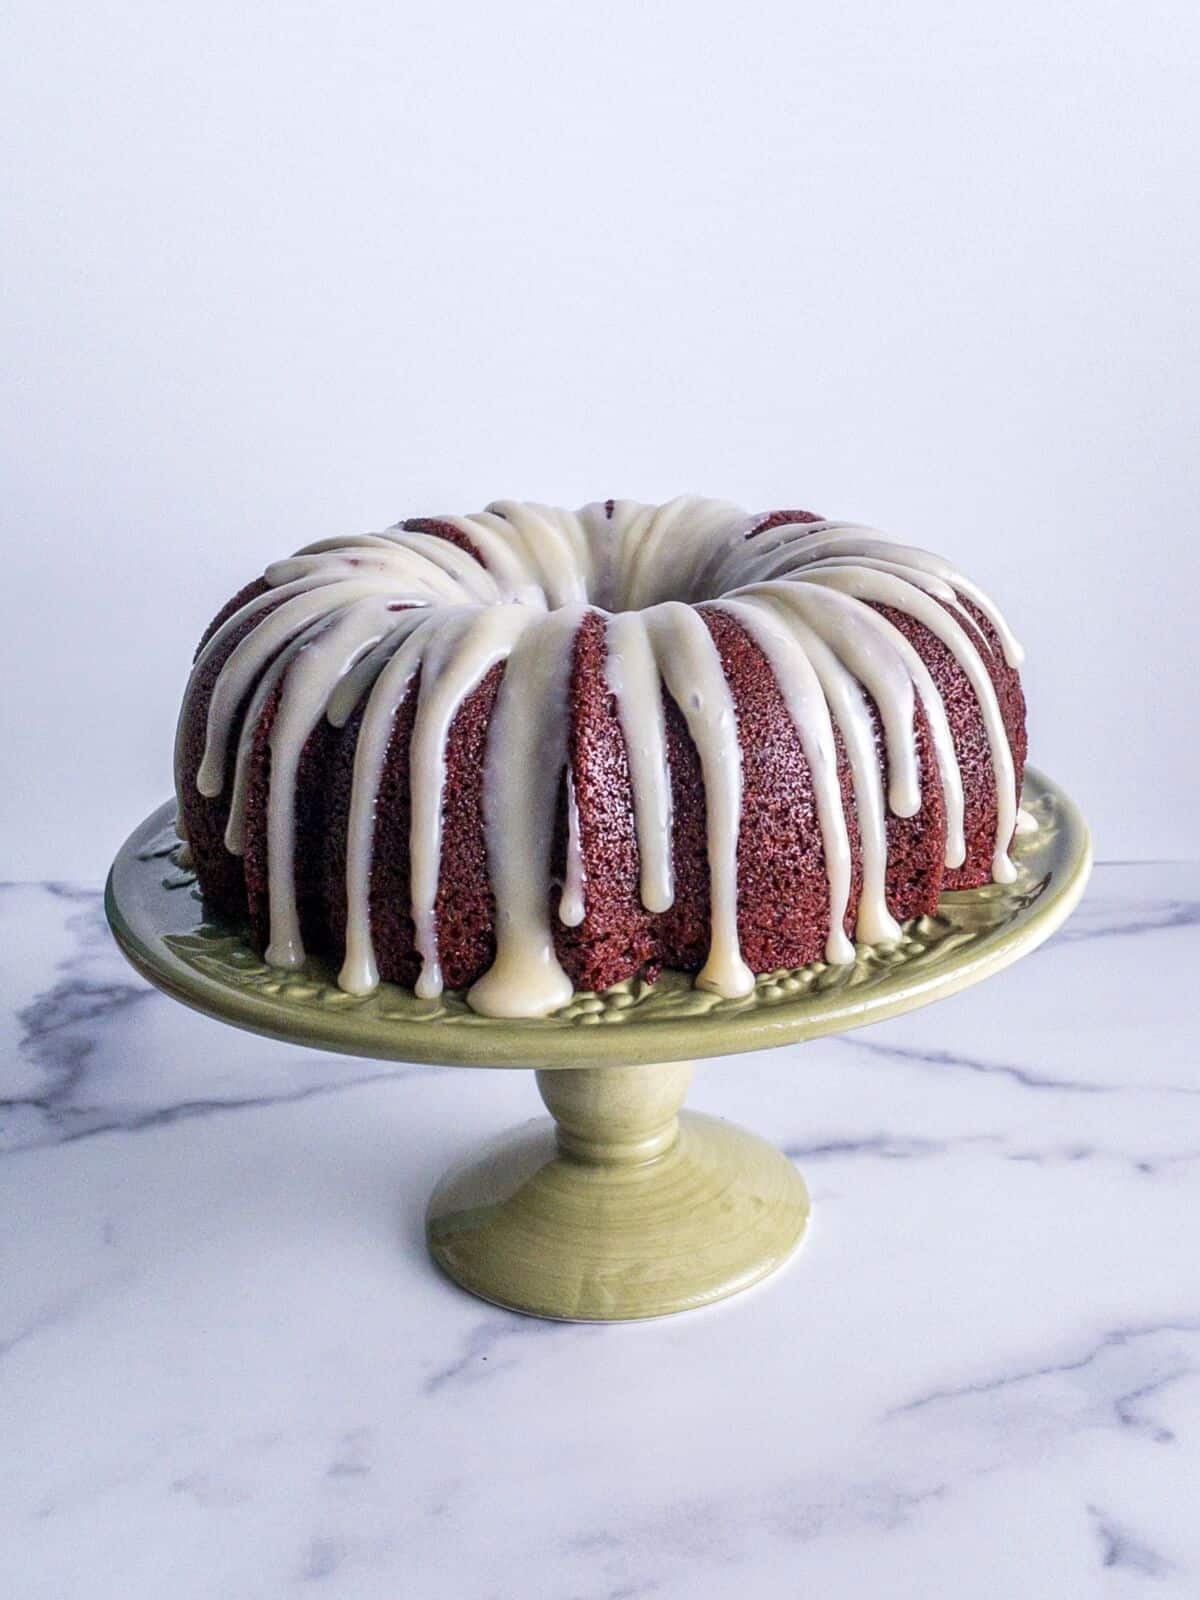 A red velvet bundt cake on a green cake pedestal with cream cheese glaze drizzle